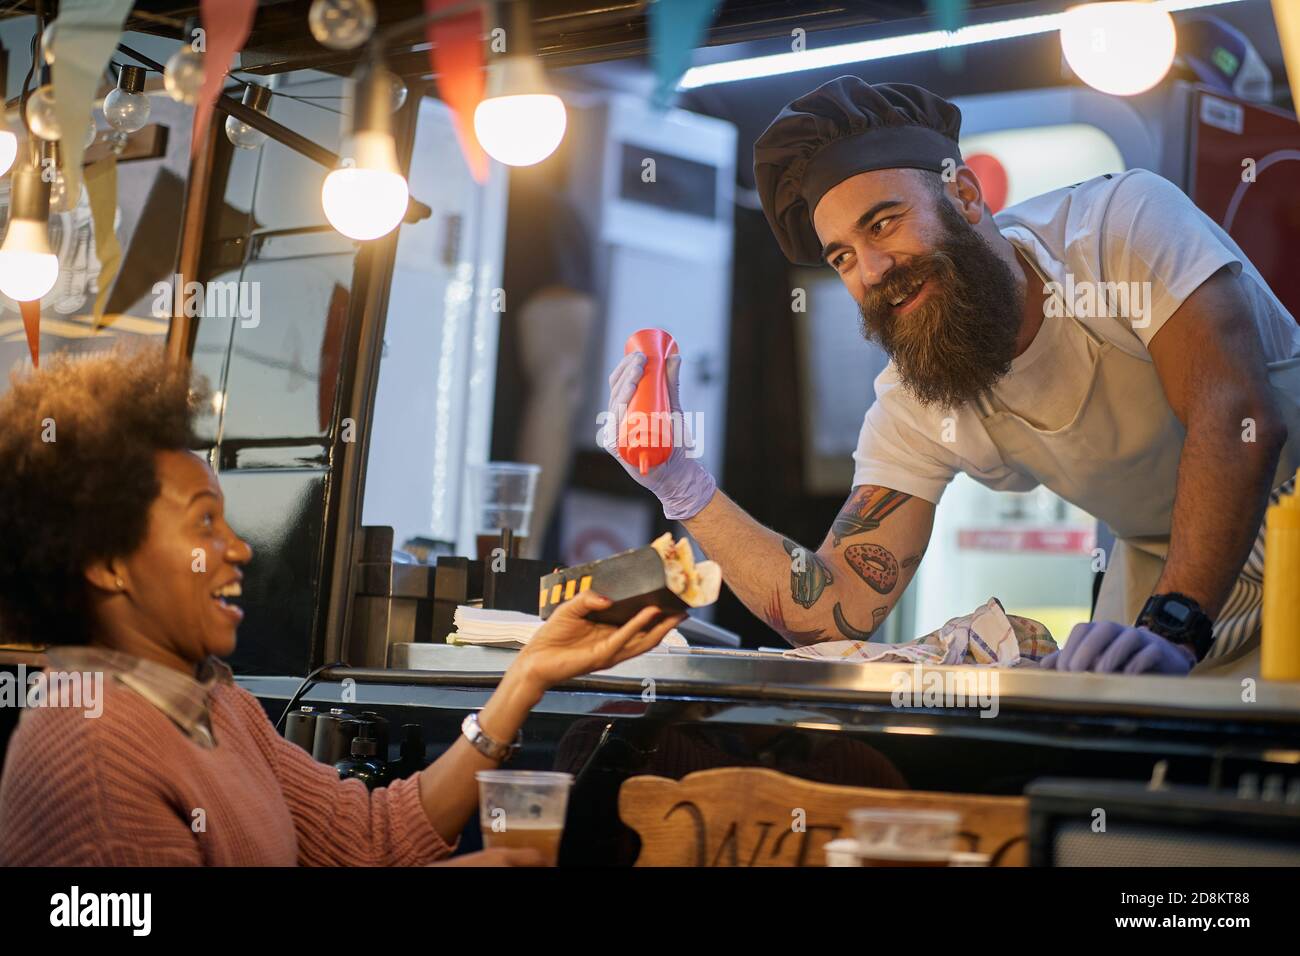 young beardy caucasian employee in fast food adding a ketchup in a sandwich to a female afro-american customer, joking, amusing Stock Photo